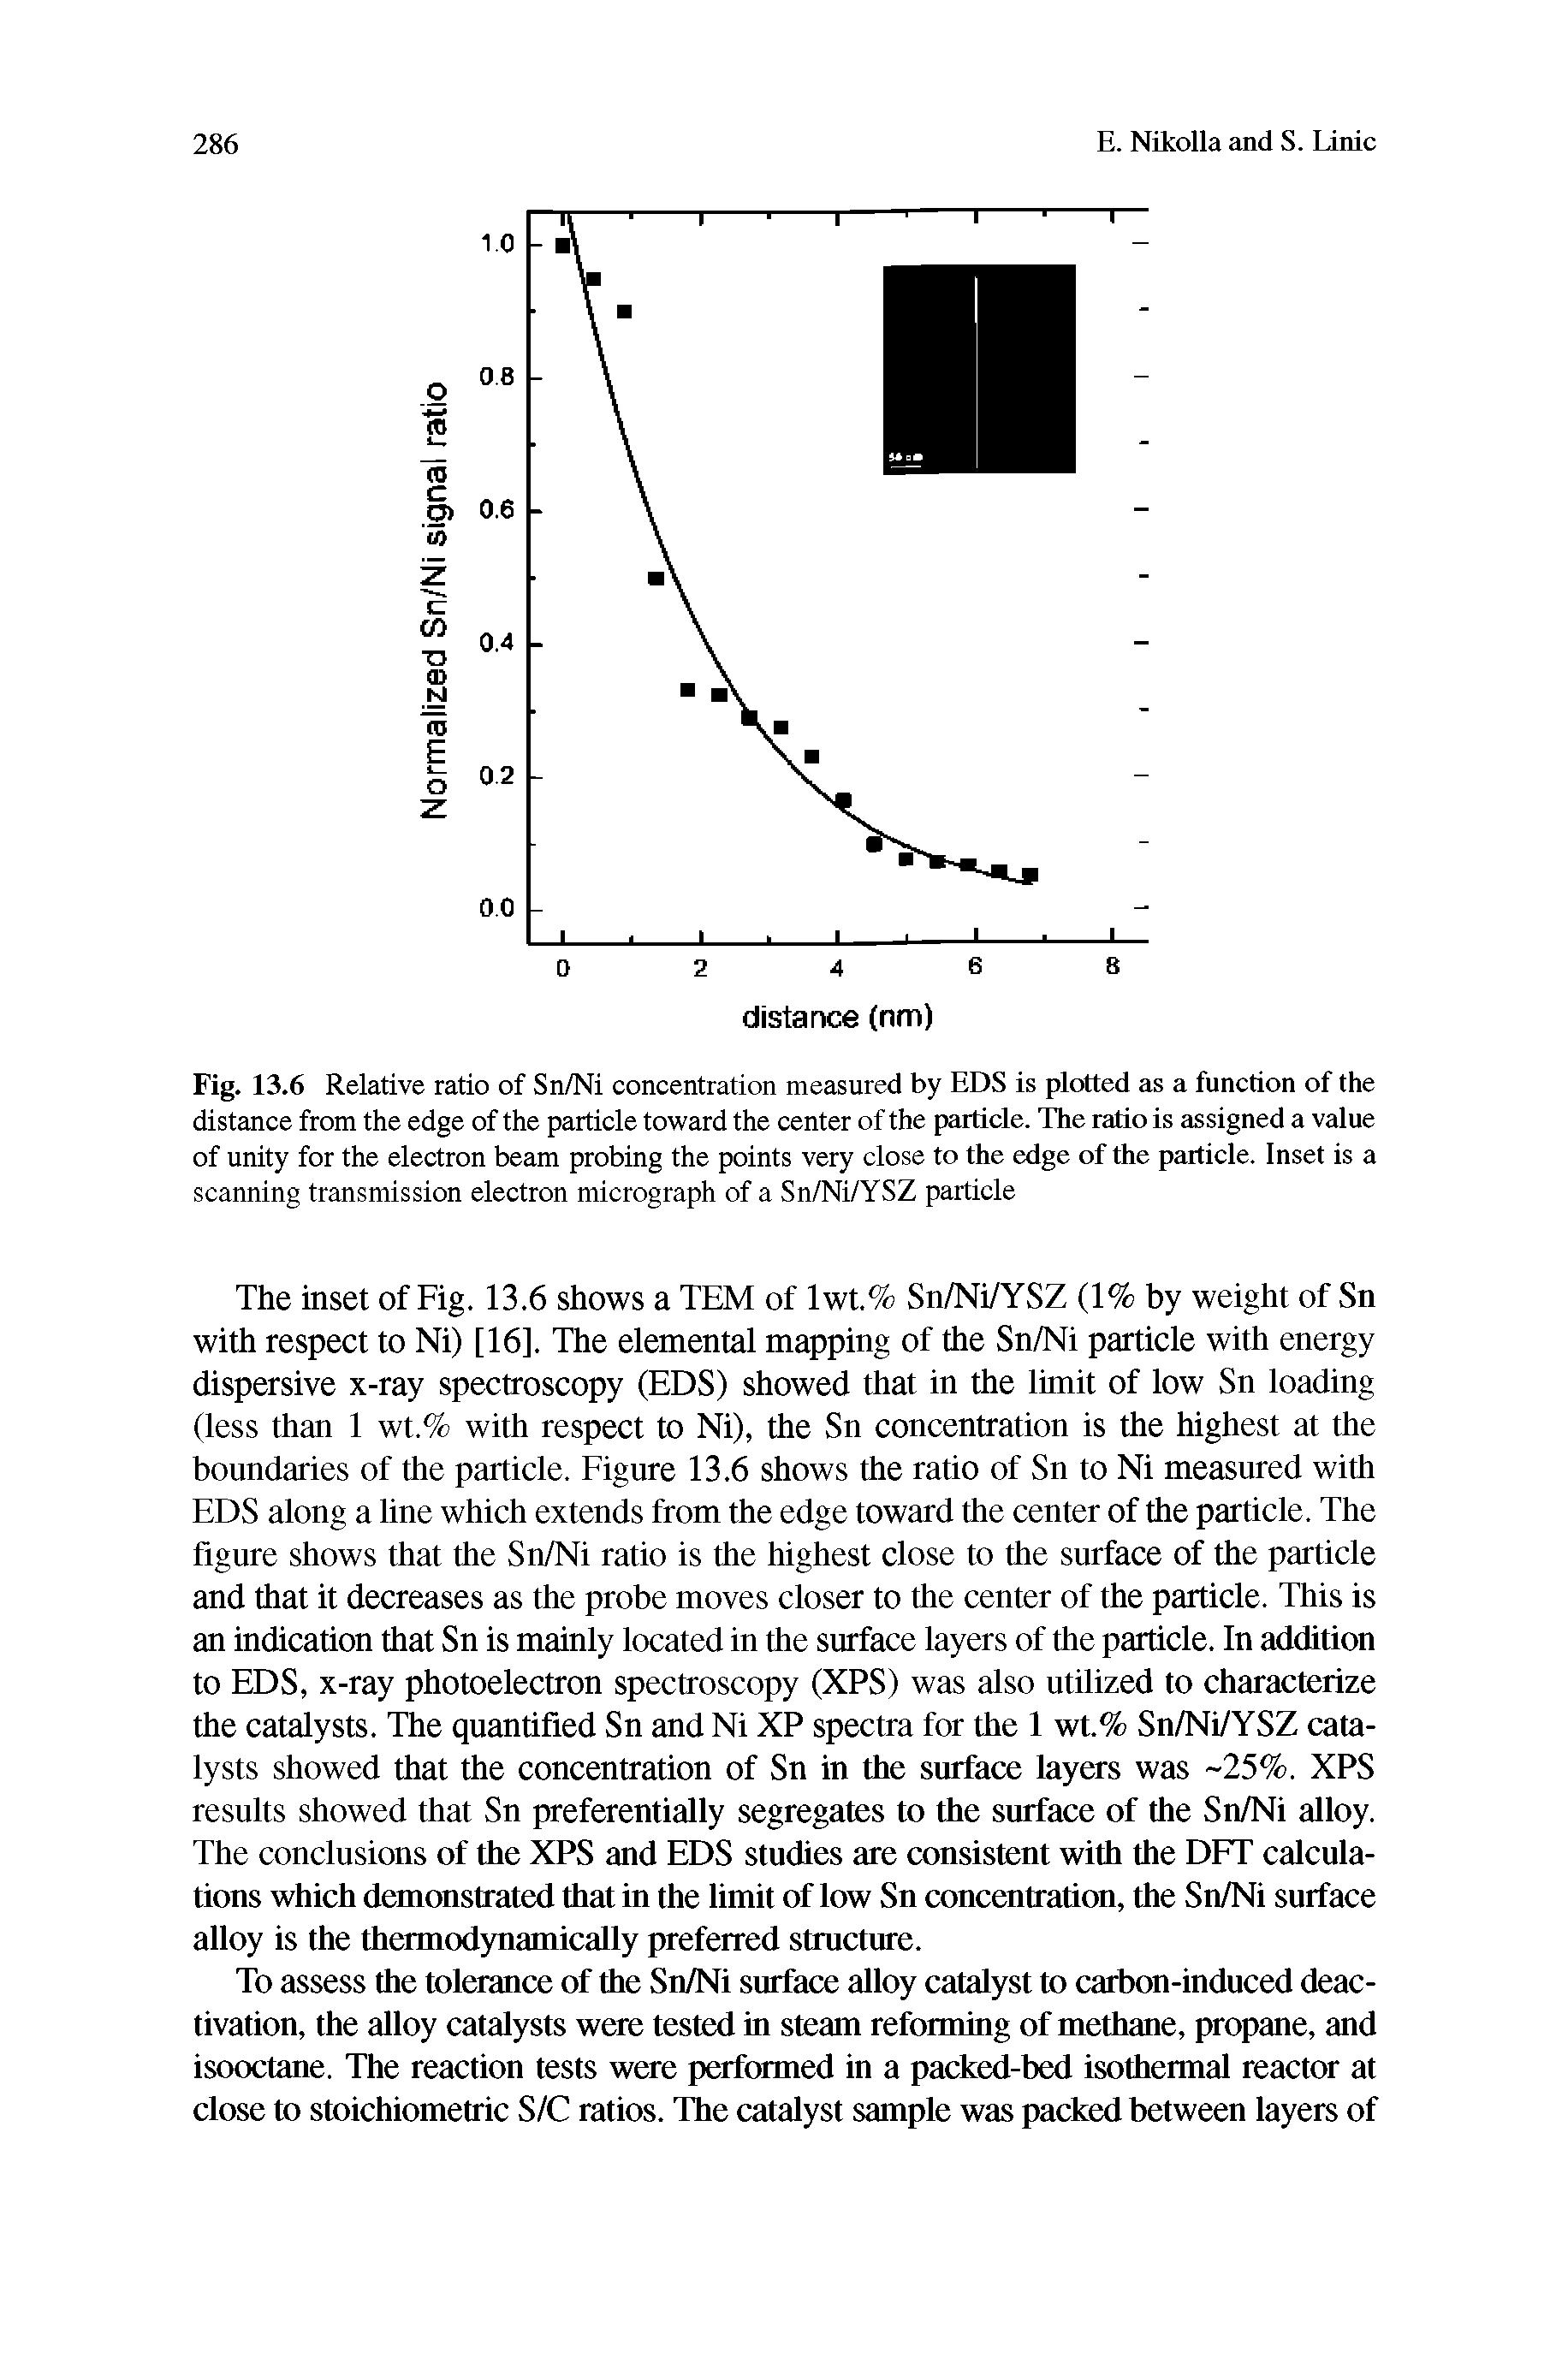 Fig. 13.6 Relative ratio of Sn/Ni concentration measured by EDS is plotted as a function of the distance from the edge of the particle toward the center of the particle. The ratio is assigned a value of unity for the electron beam probing the points very close to the edge of the particle. Inset is a scanning transmission electron micrograph of a Sn/Ni/YSZ particle...